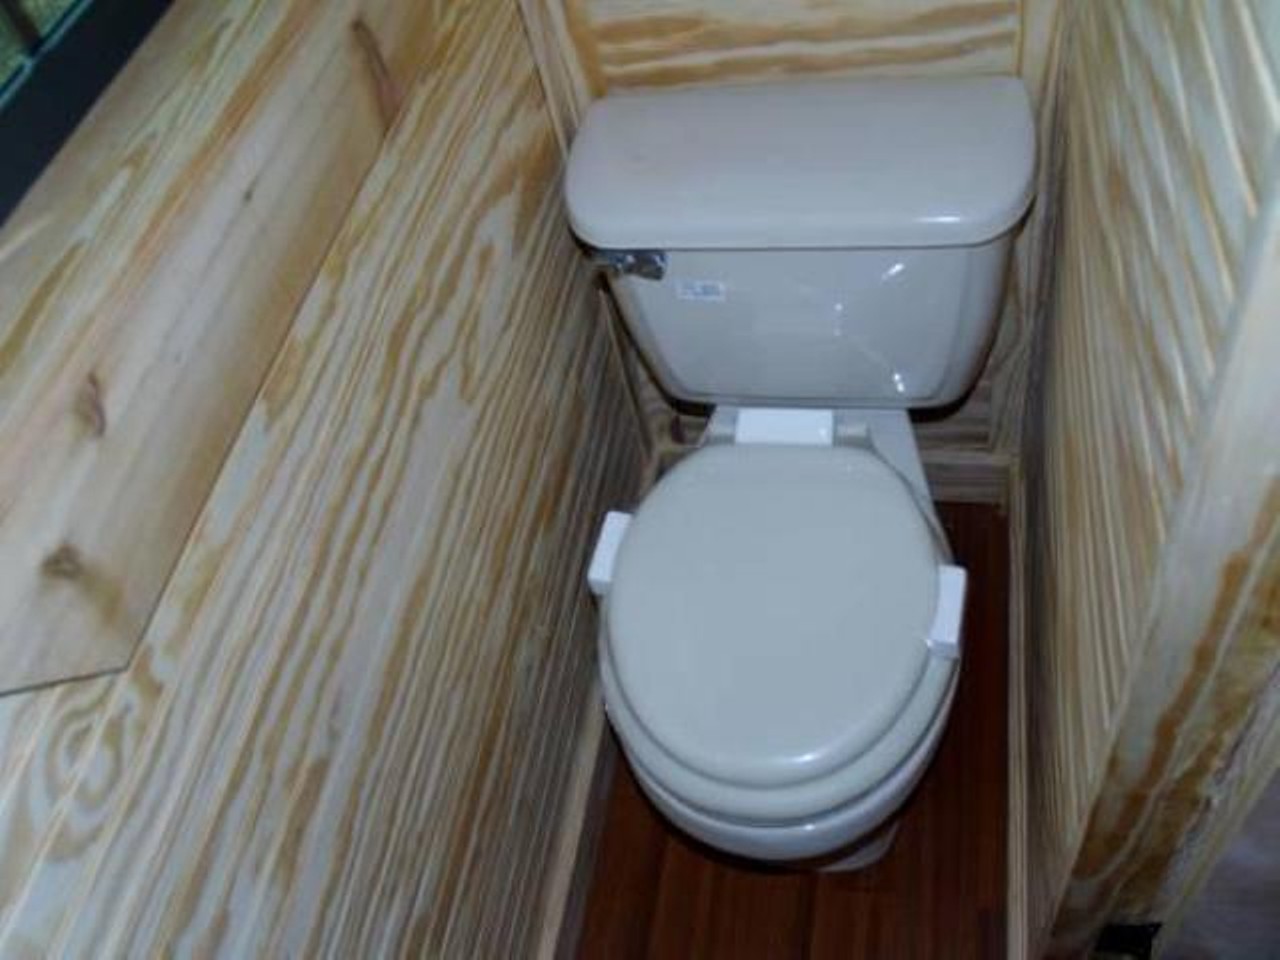 Tumbleweed Cypress 20
Price: $44000
Size: 144 sq ft 
It's probably so hard to clean behind that toilet.